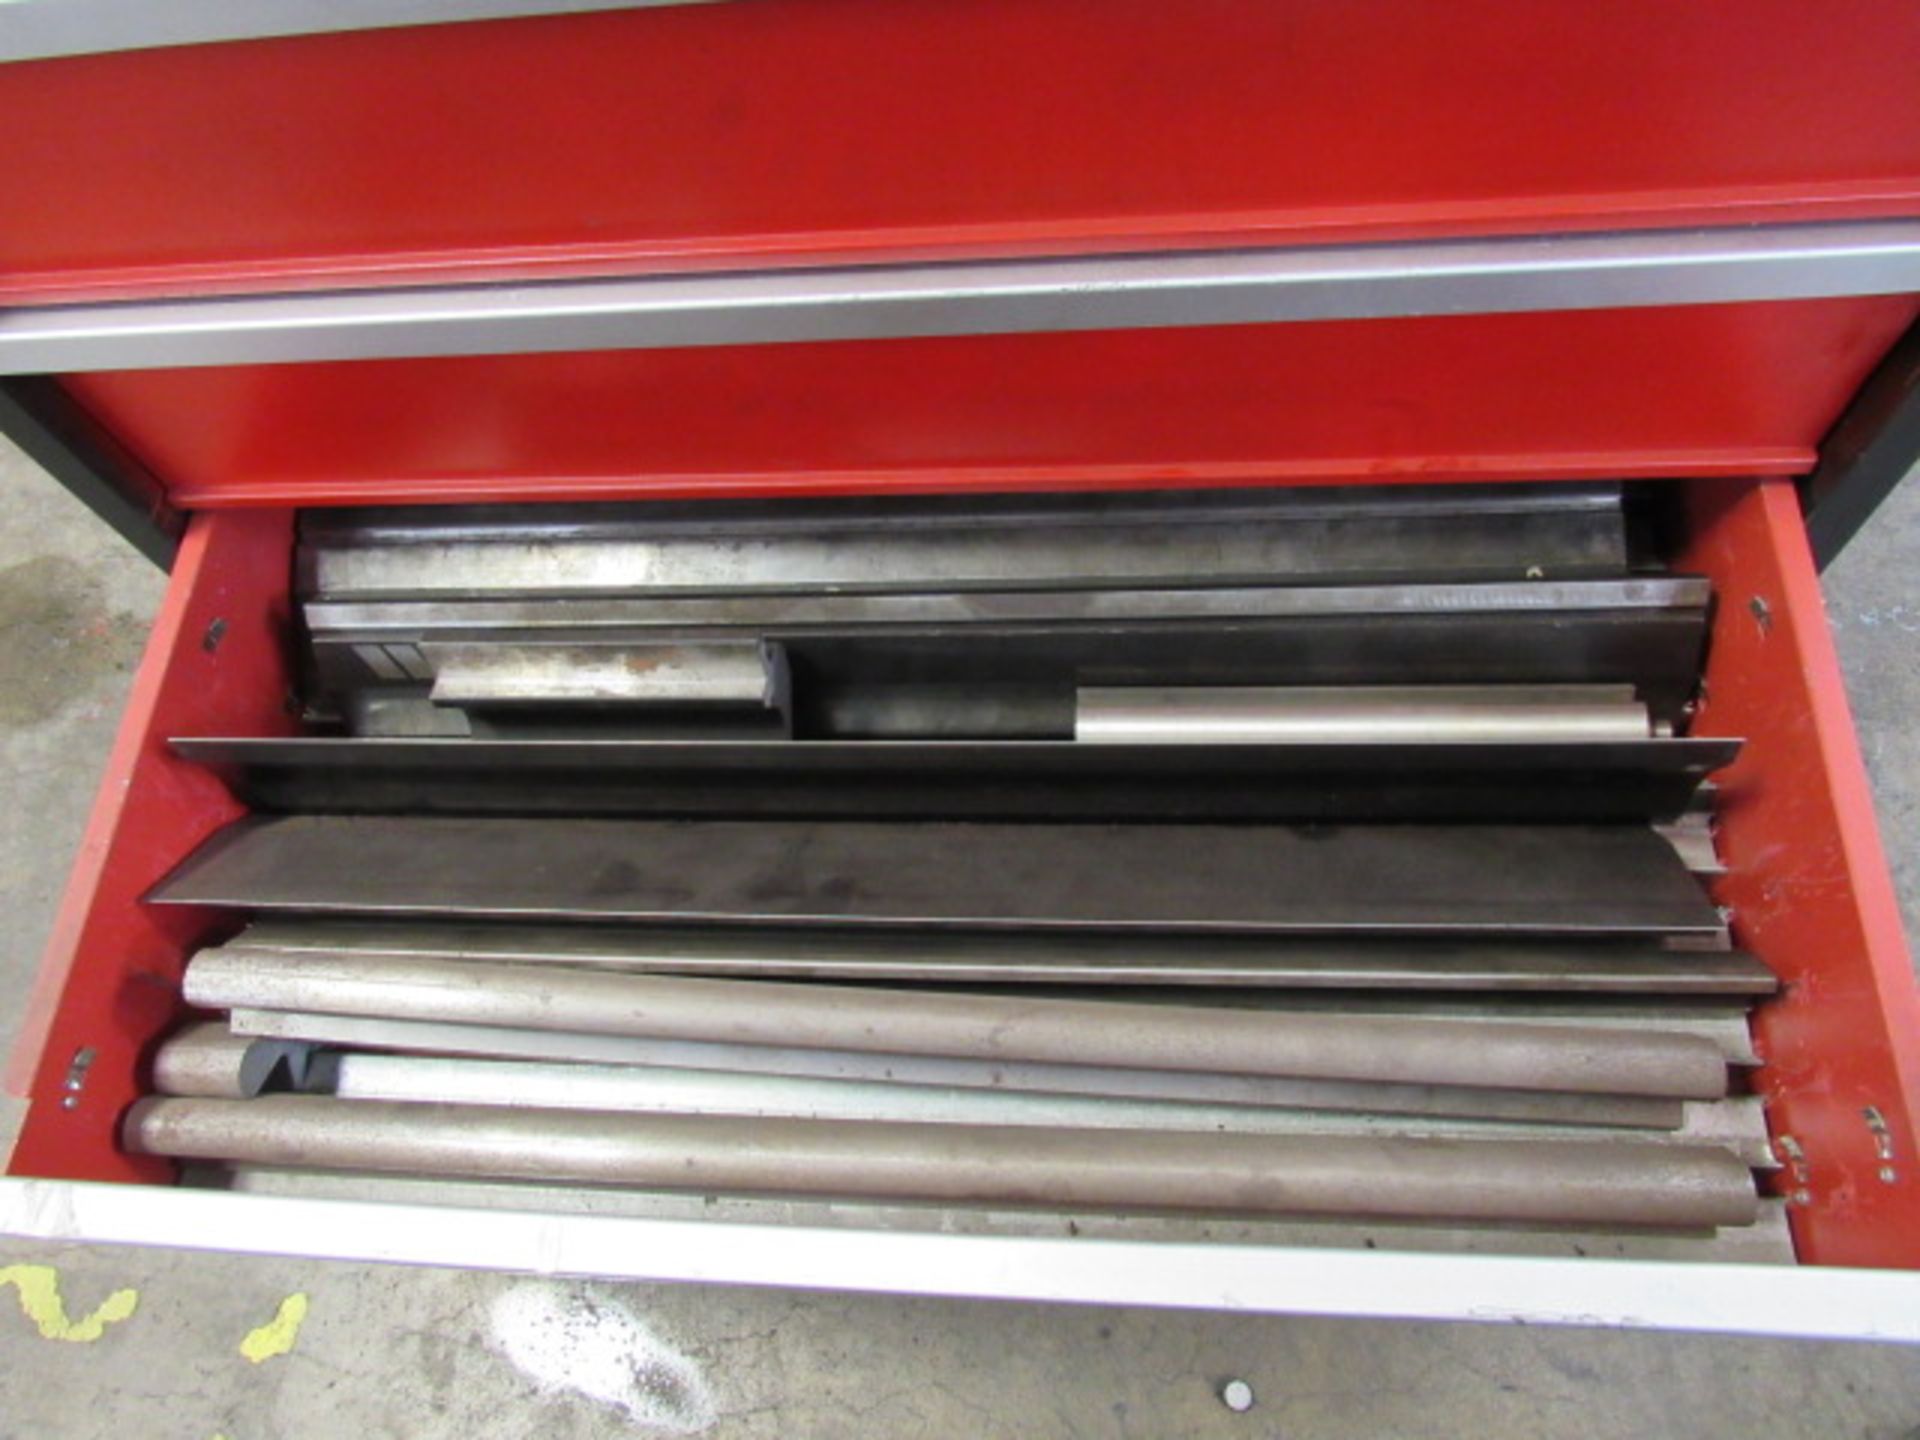 Amada 5 Drawer Portable Cabinet with Press Brake Dies - Image 3 of 7